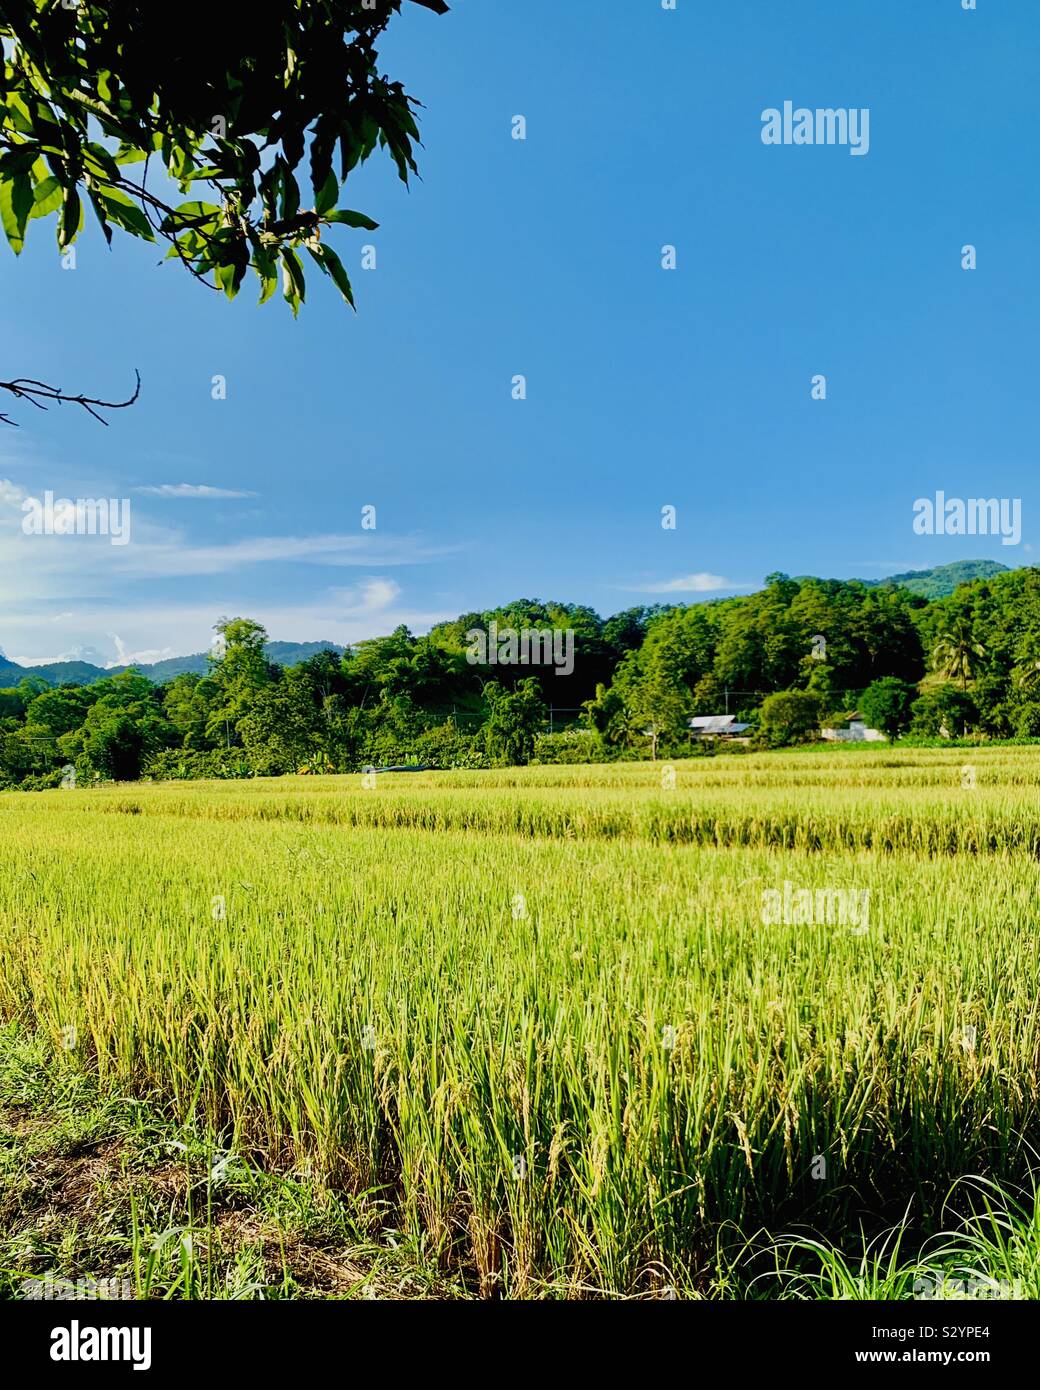 Paddy fields in Thailand. Stock Photo